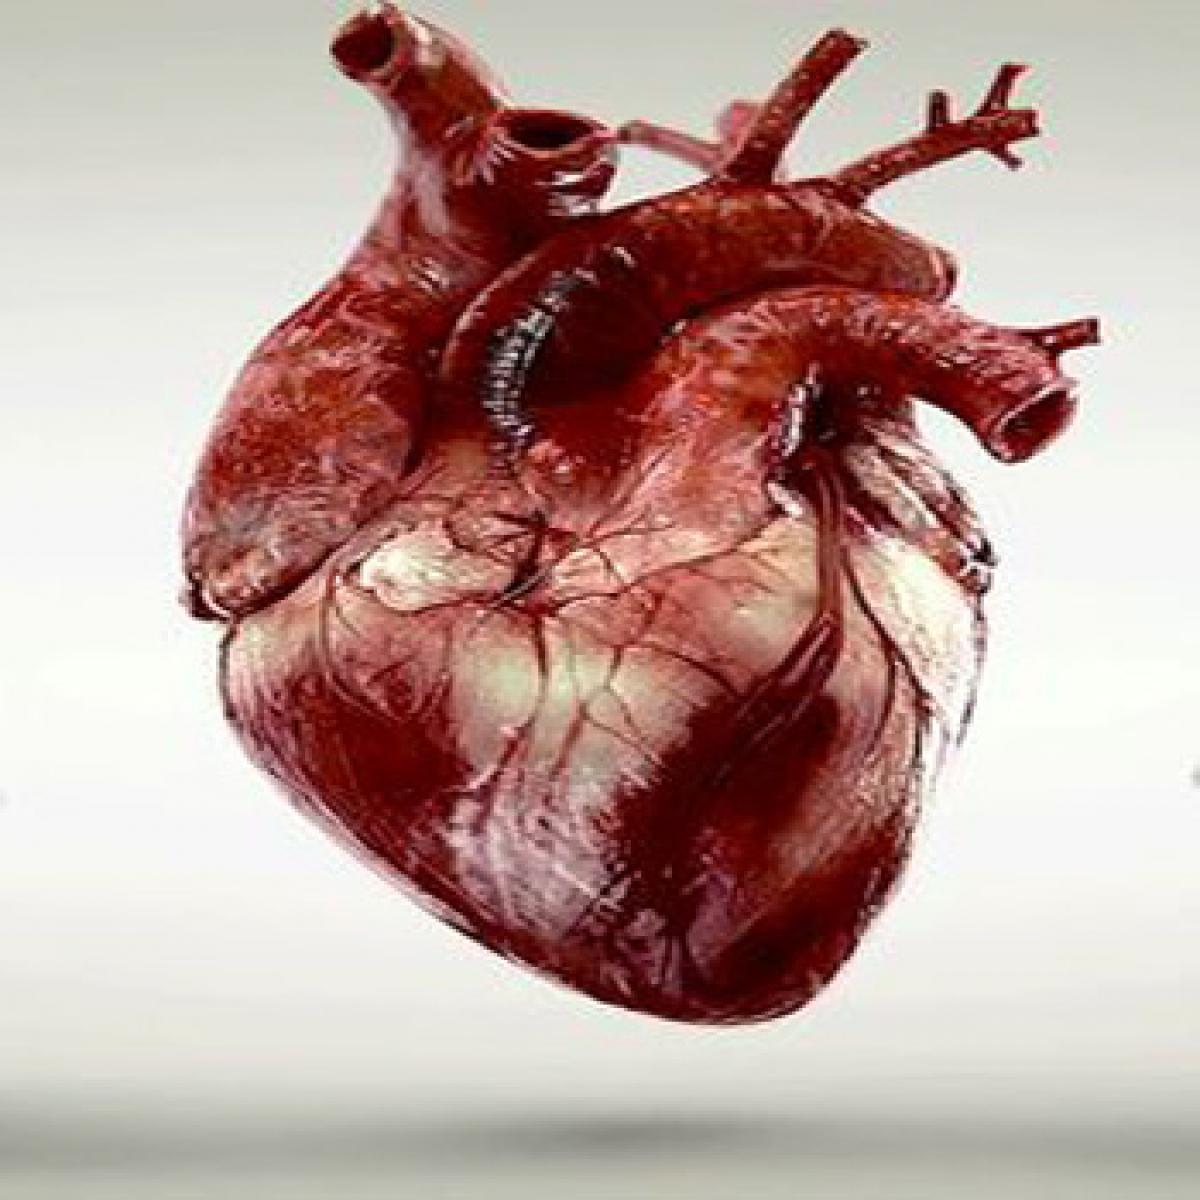 3D heart, liver tissues that function like real organs